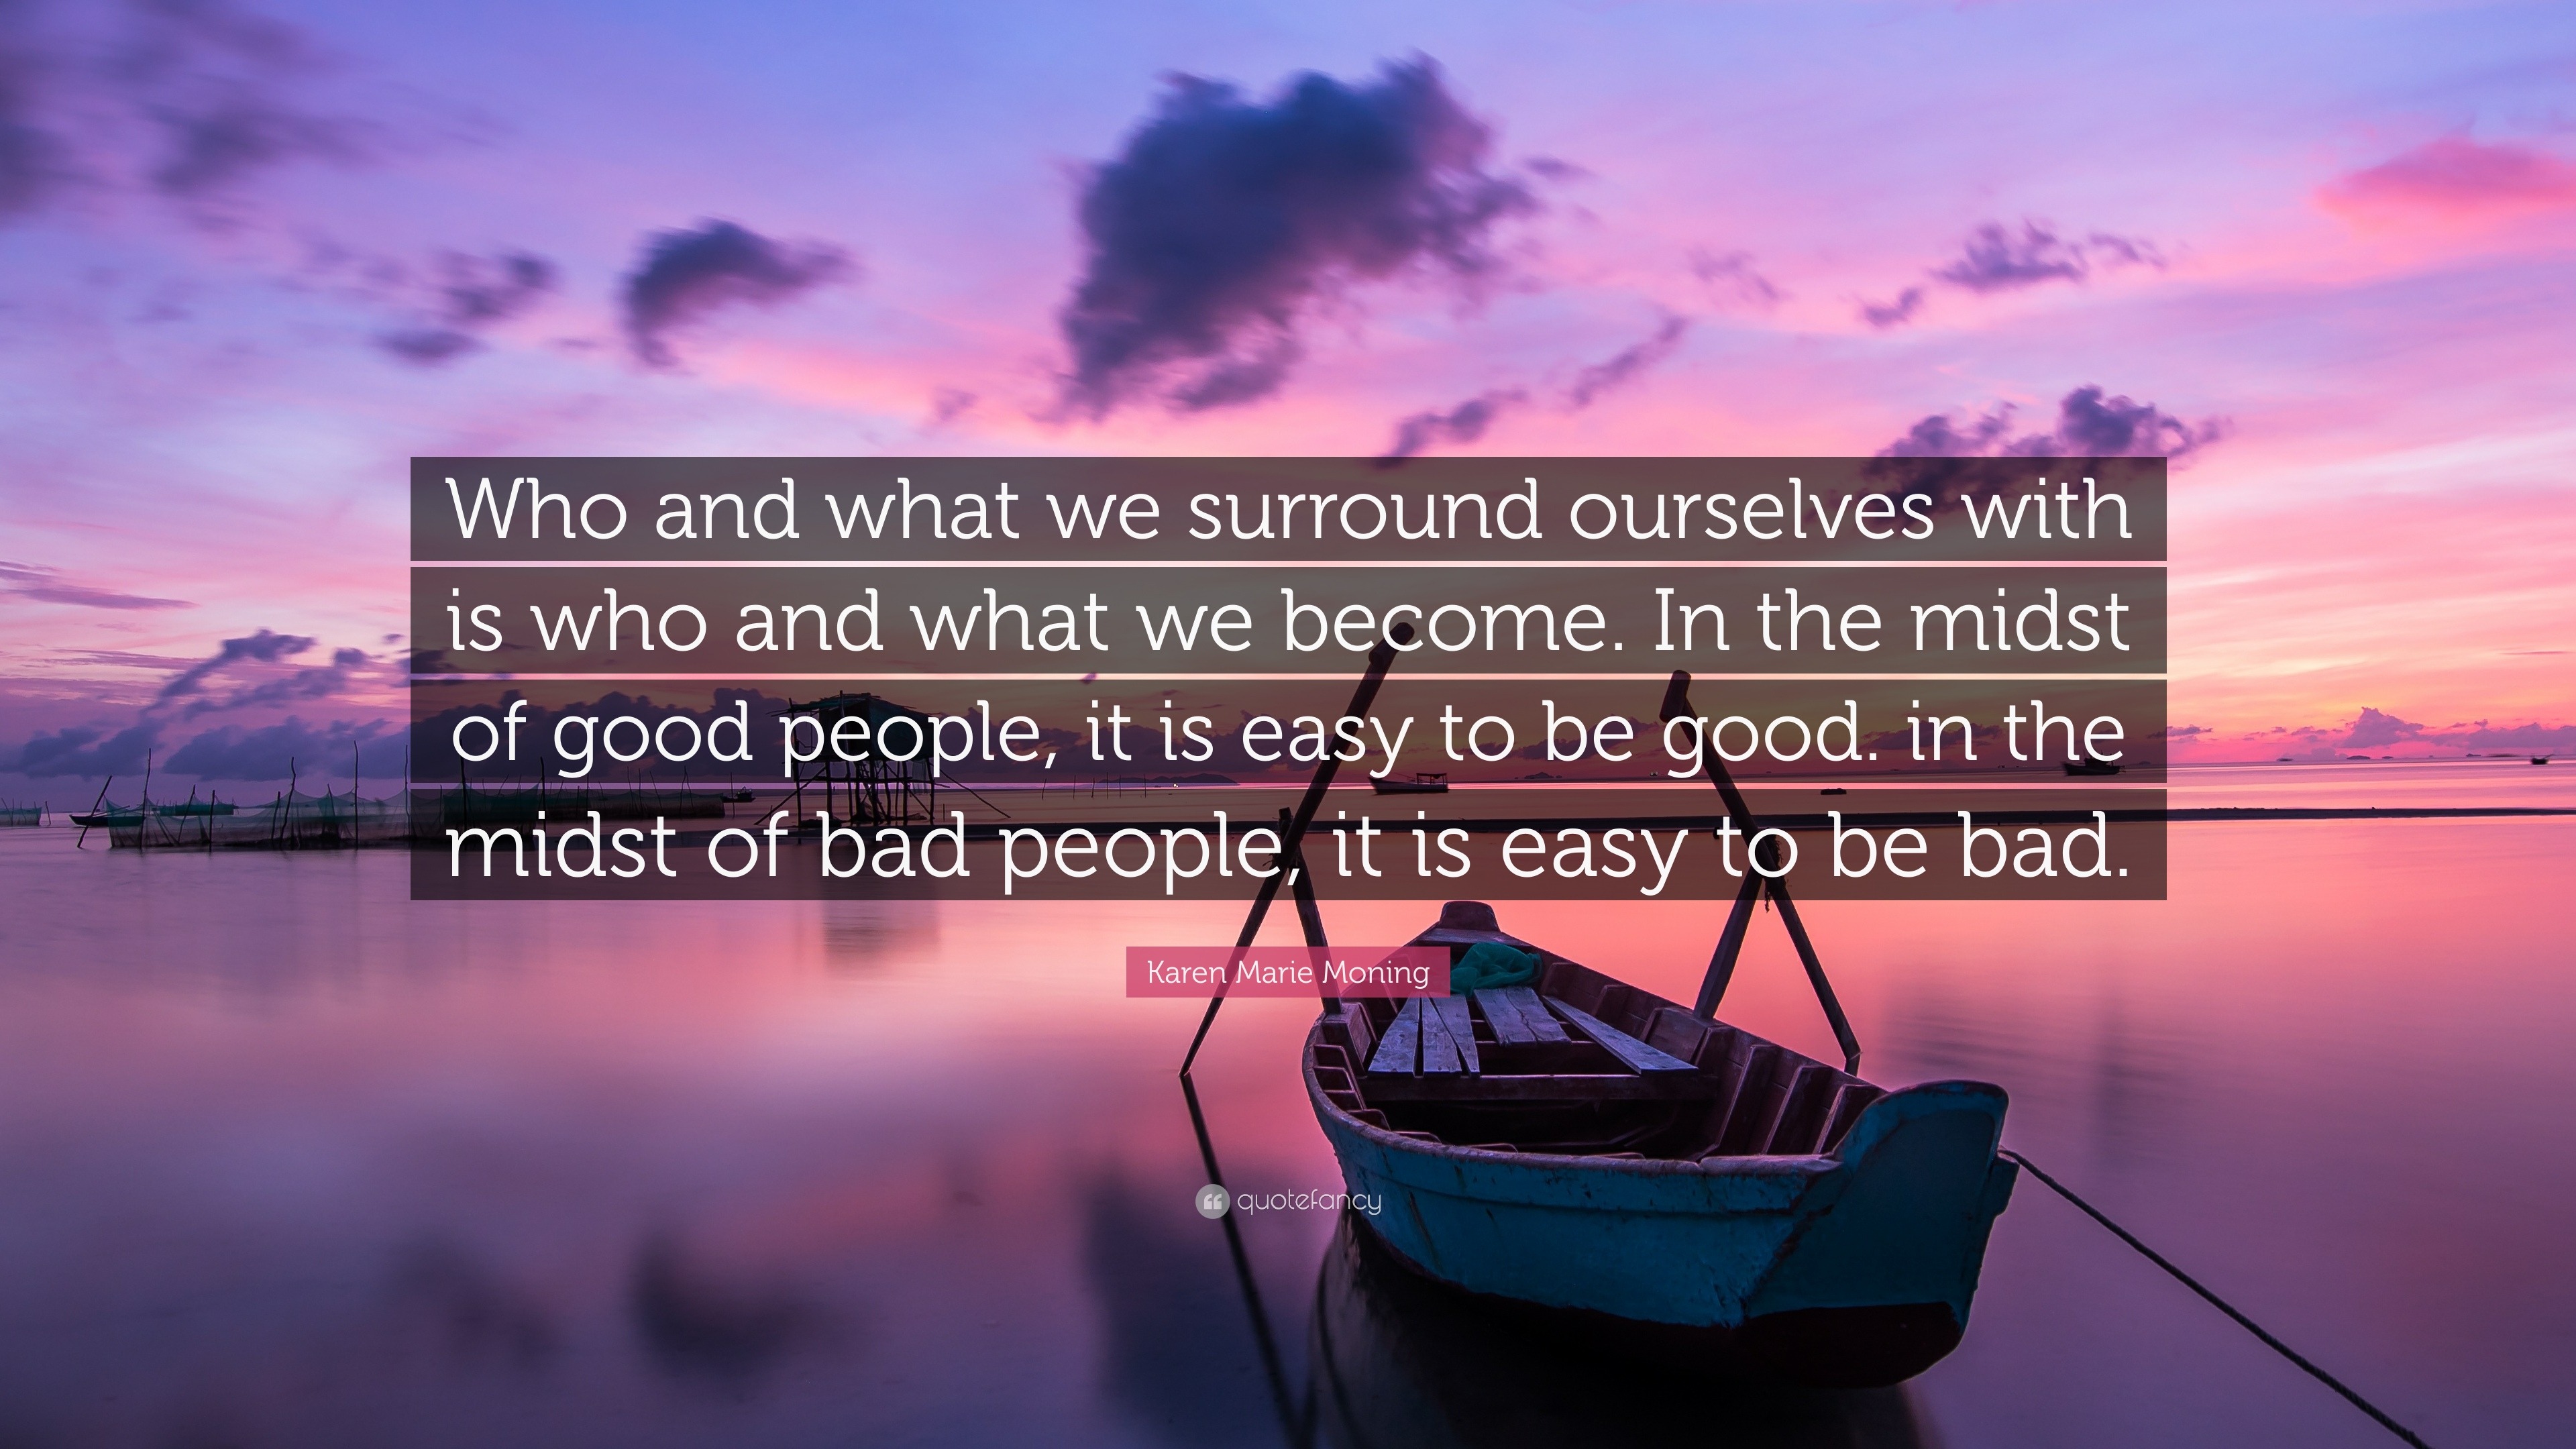 Karen Marie Moning Quote: “Who and what we surround ourselves with is ...